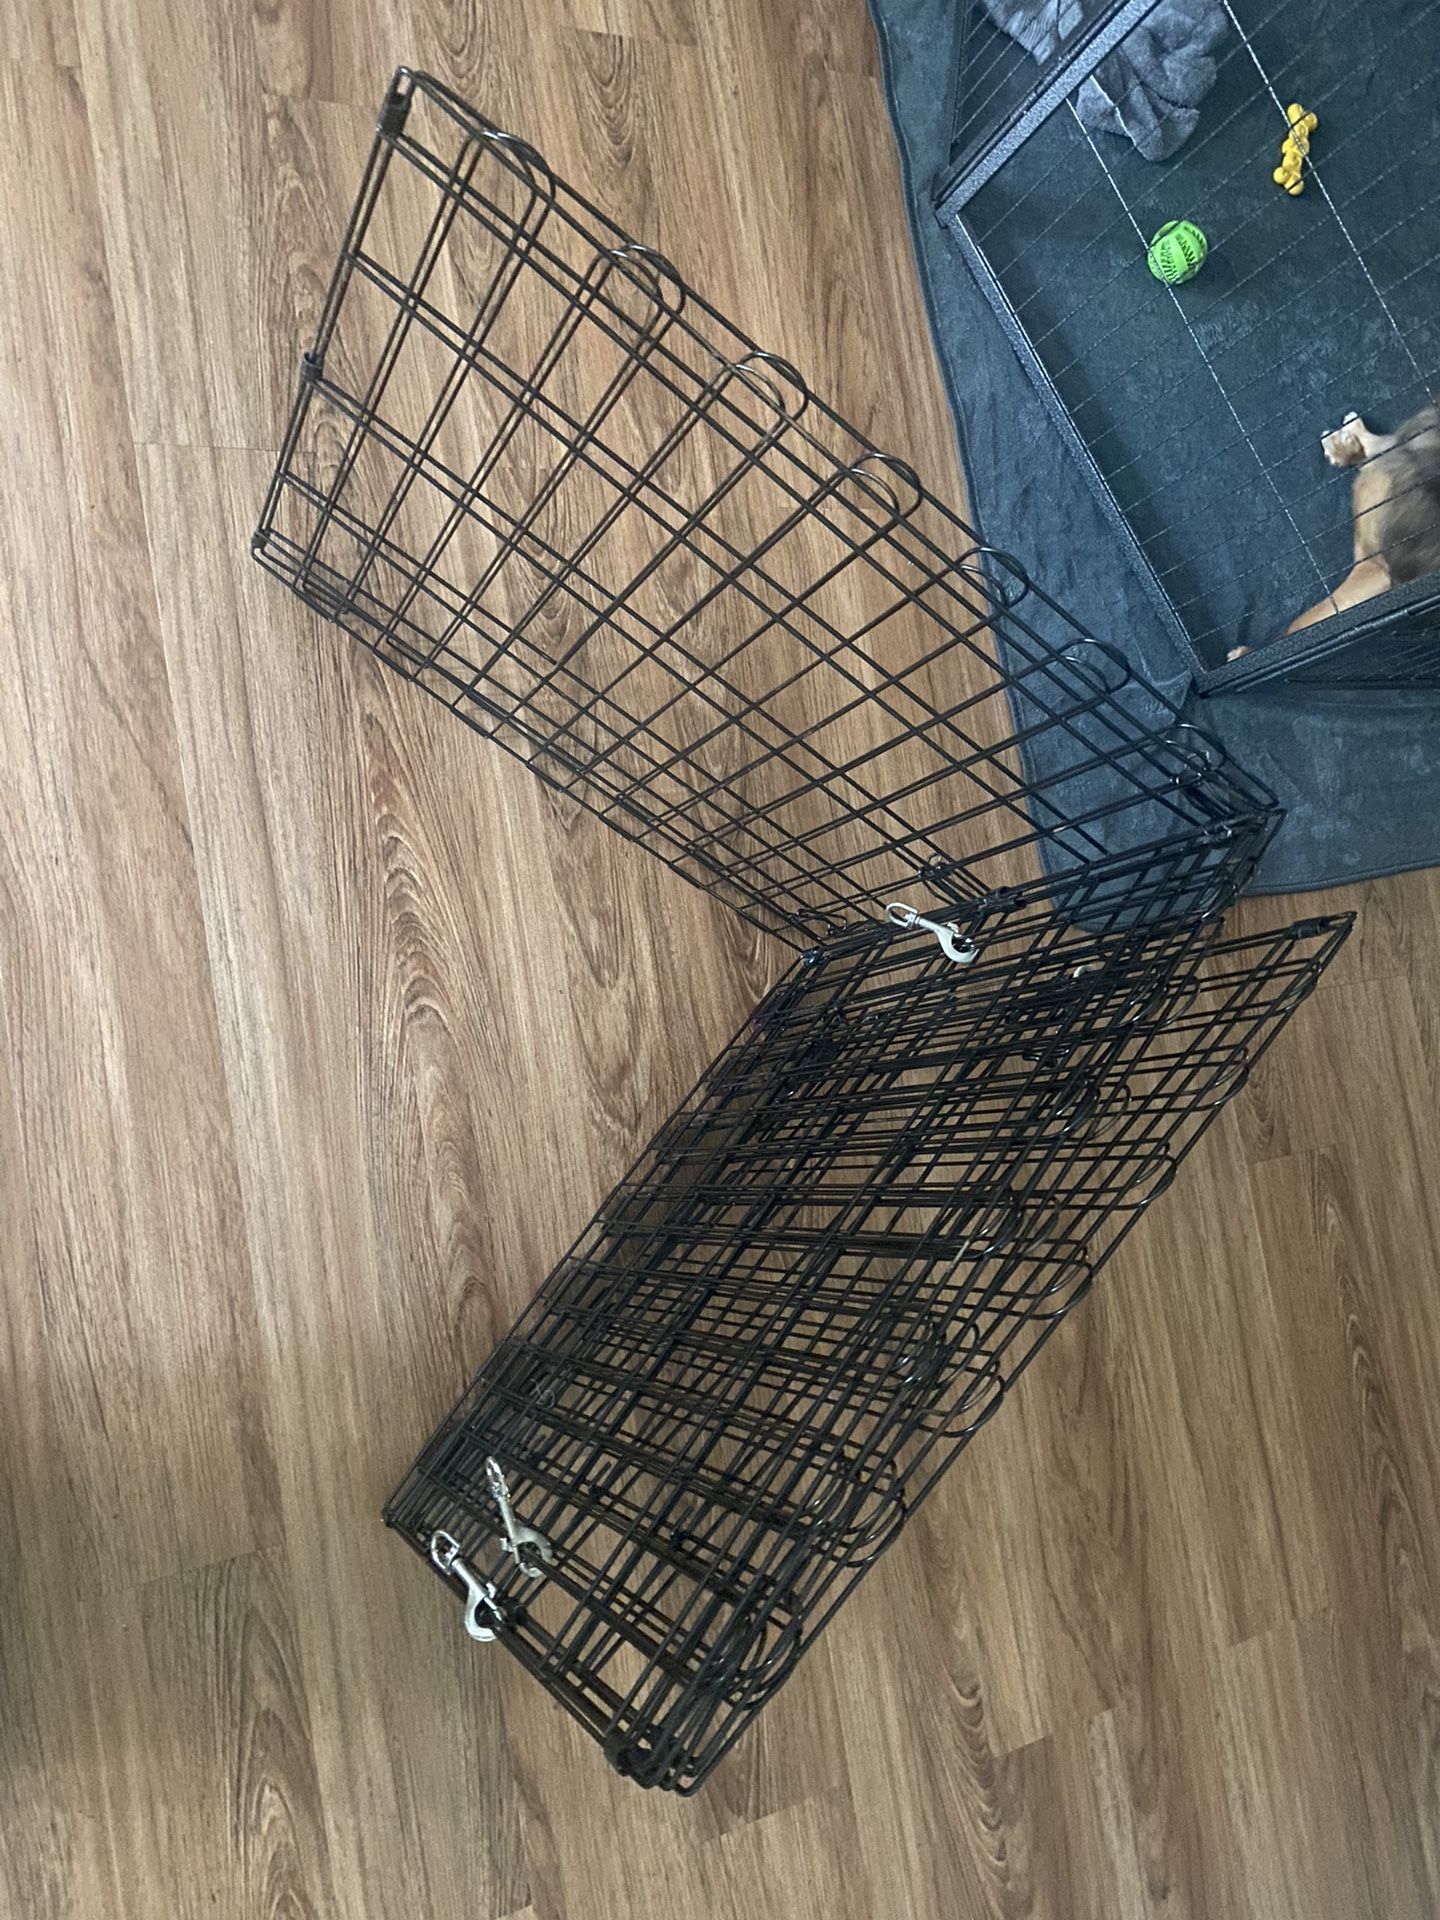 Small dog Or Animal Starter Cage